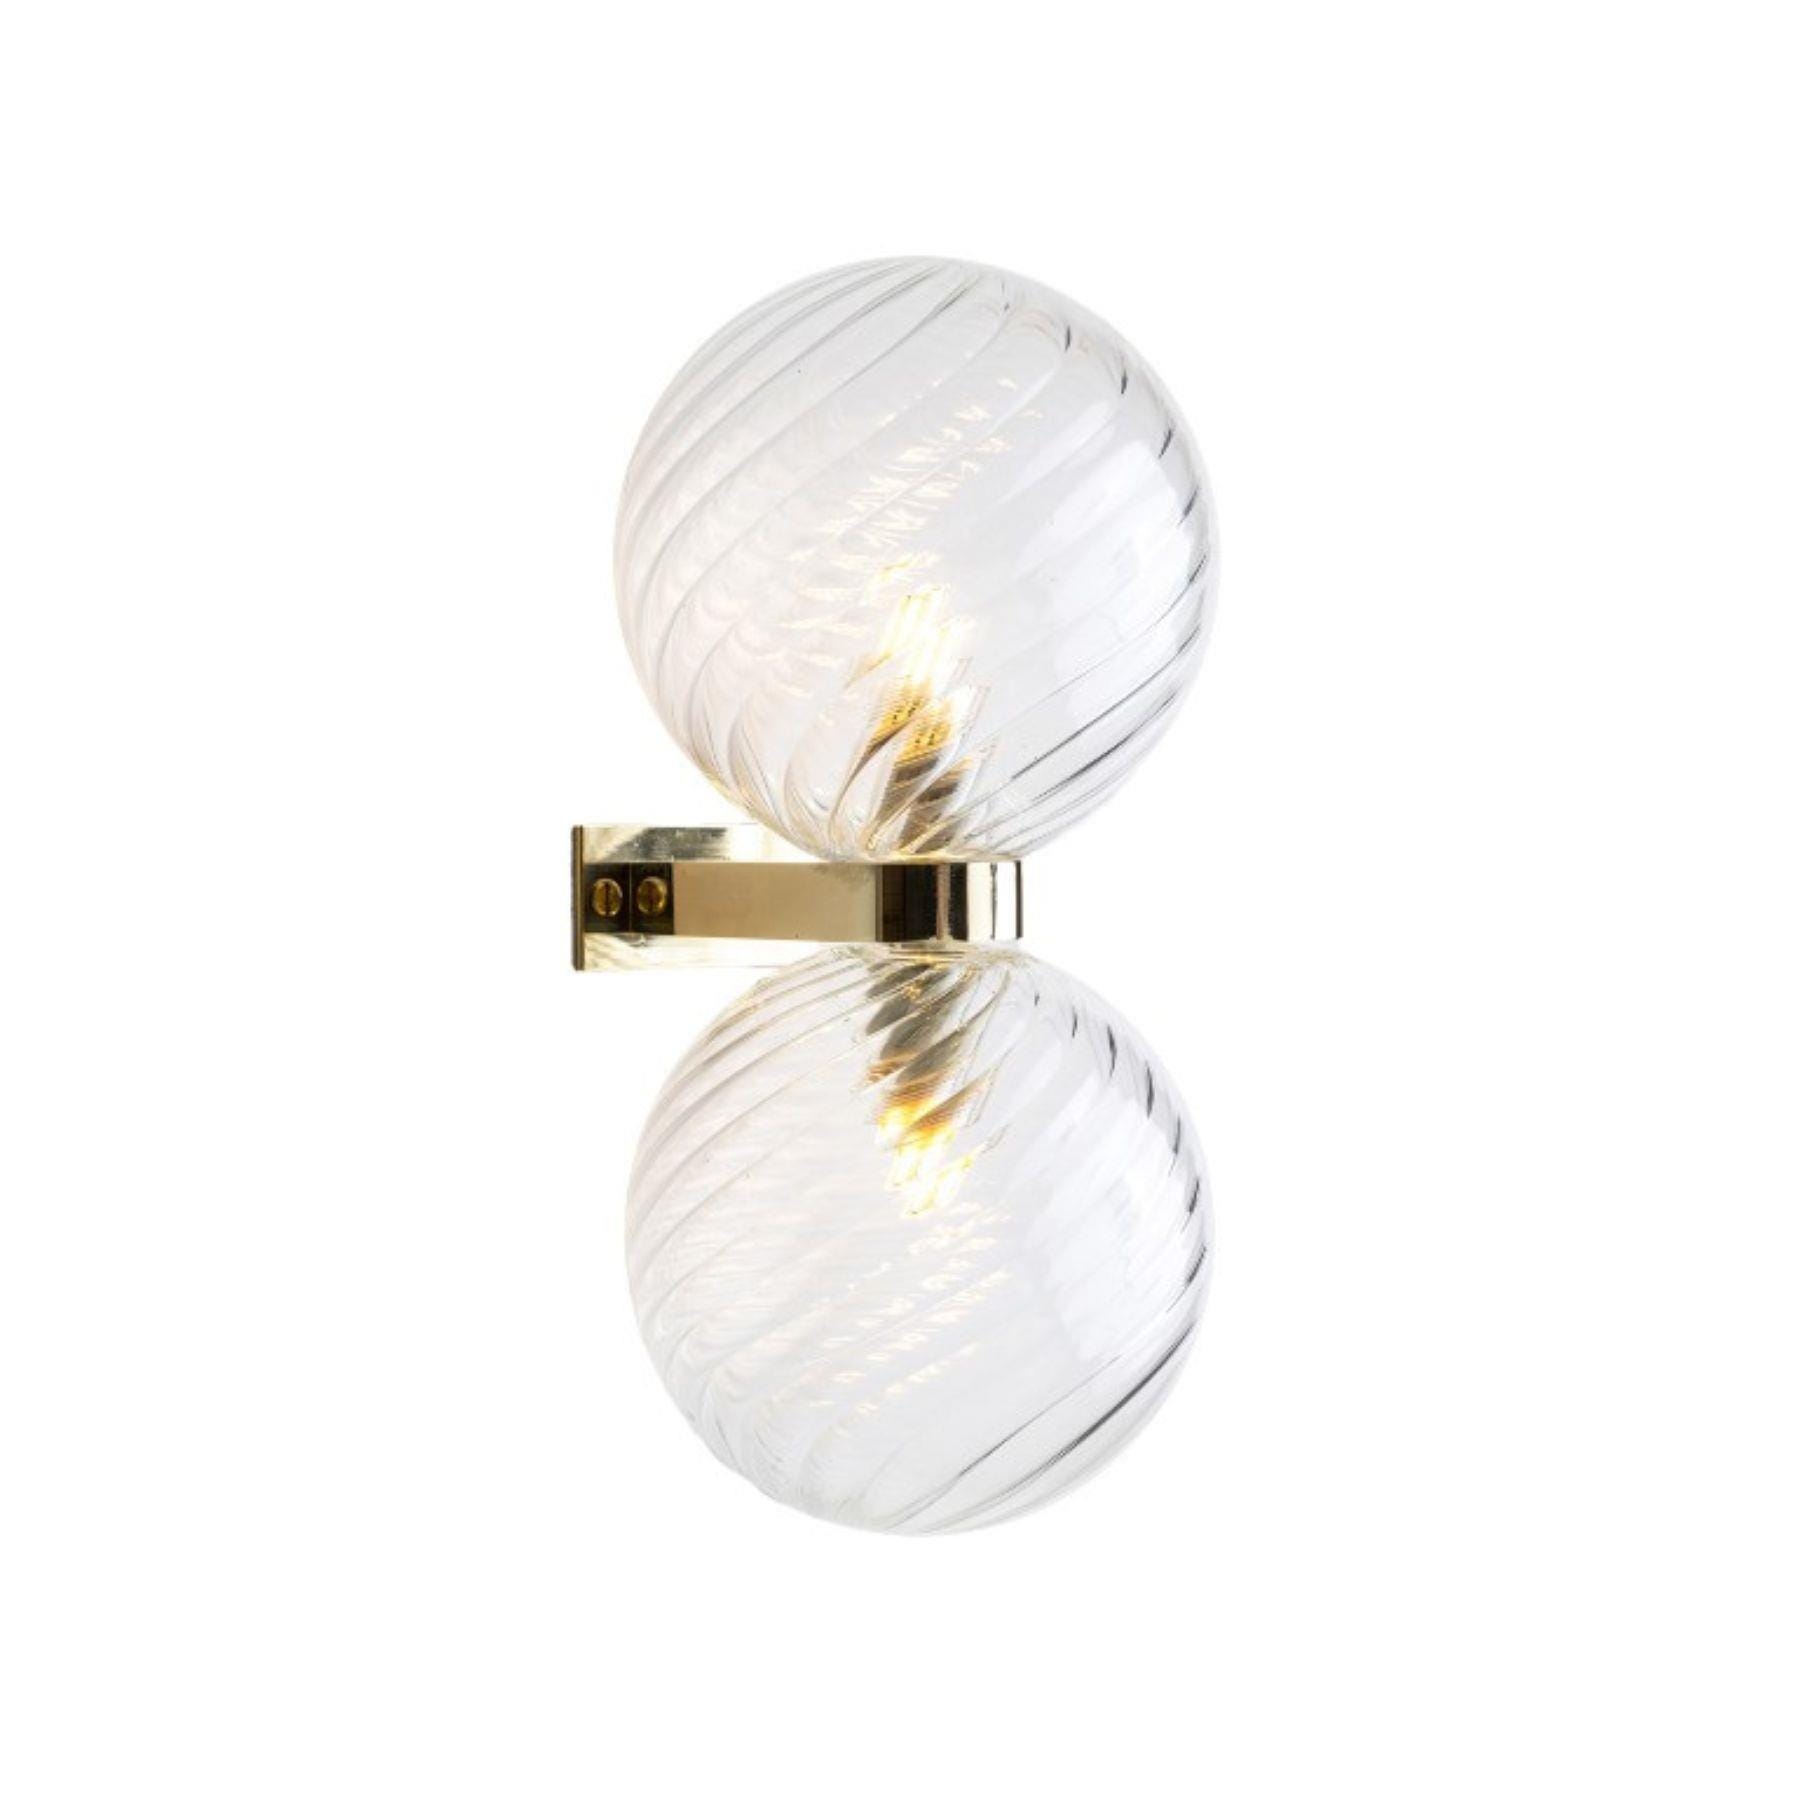 Leverint Pimlico Duo Deco Wall Light Pink Wall Lighting